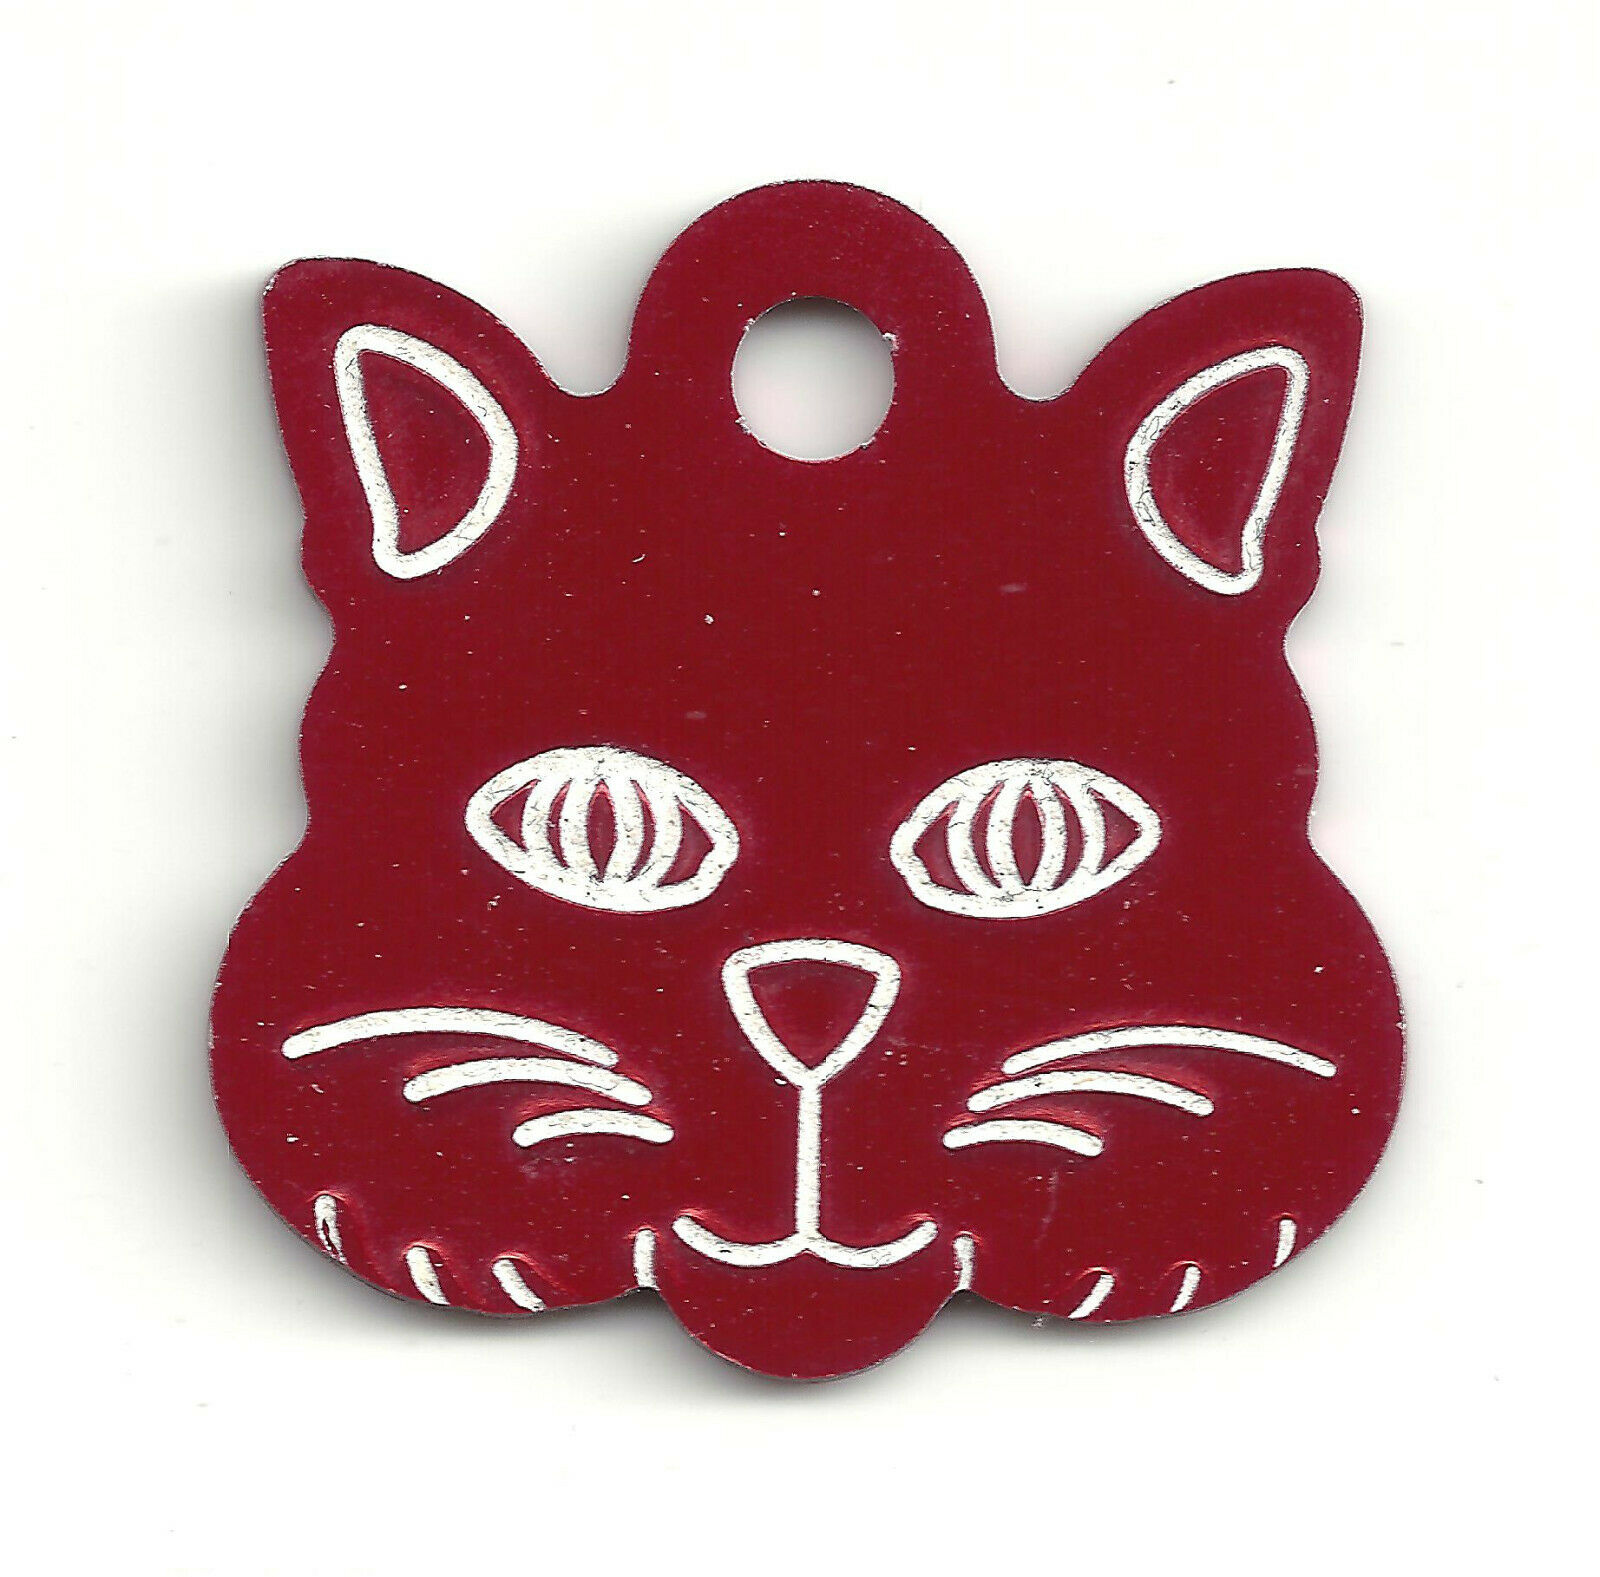 Pet ID Tags for Cats & Kittens Personalized, Bells, Mice, Hearts, Paws, Cats!